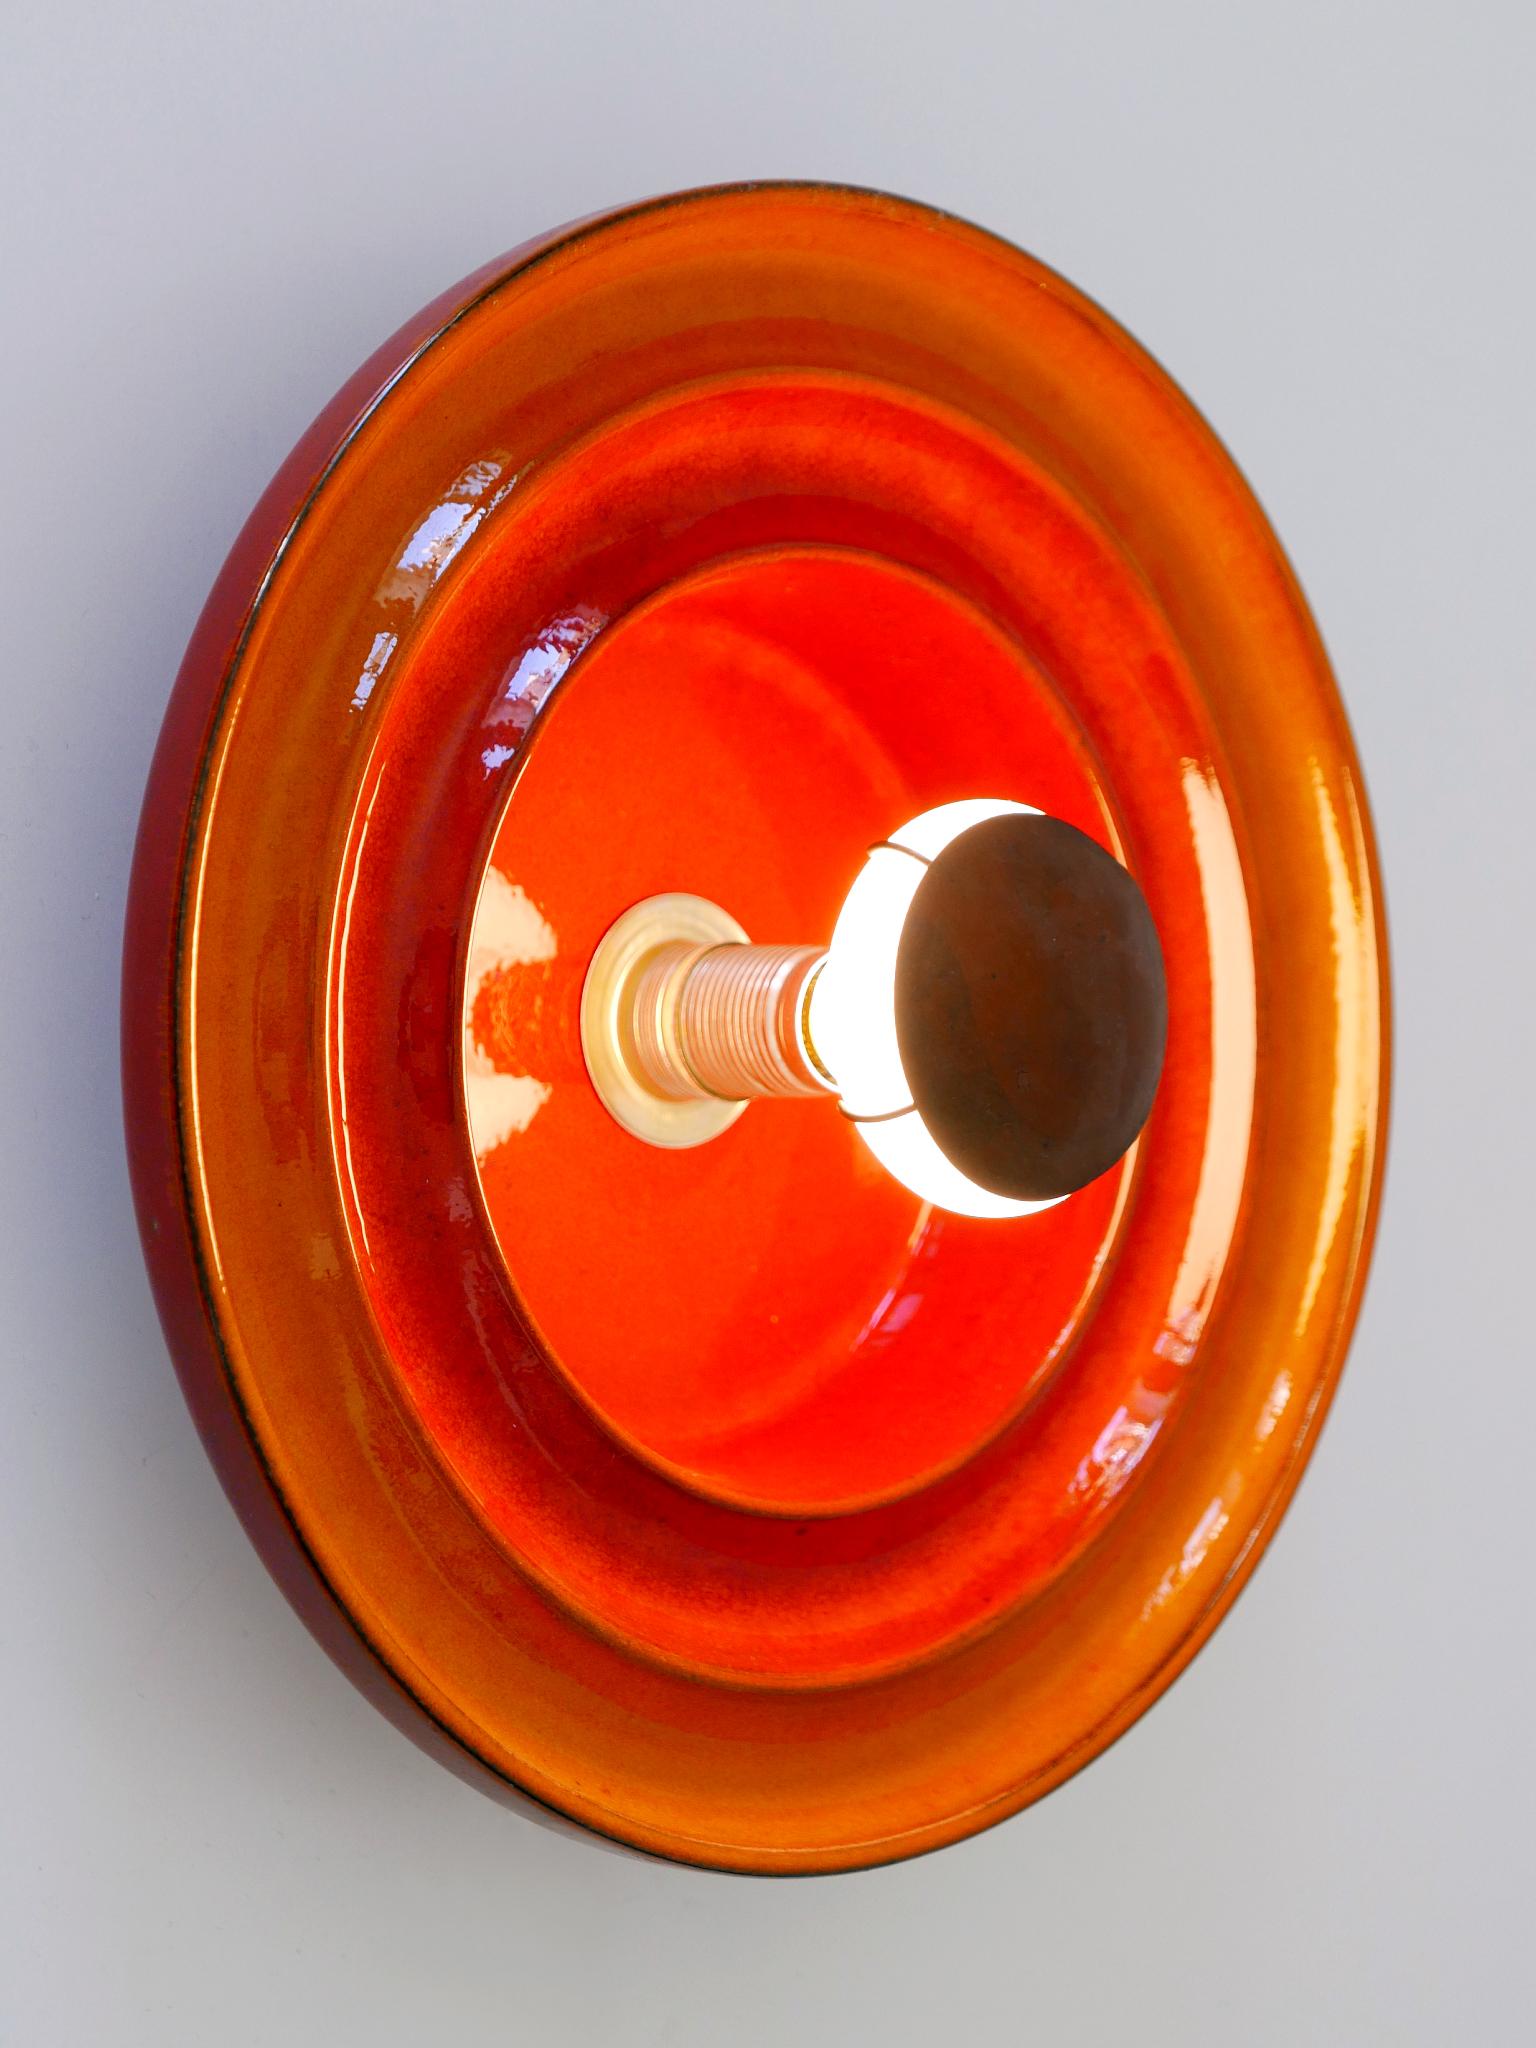 Metal Highly Decorative Mid Century Modern Ceramic Sconce or Wall Light Germany 1960s For Sale